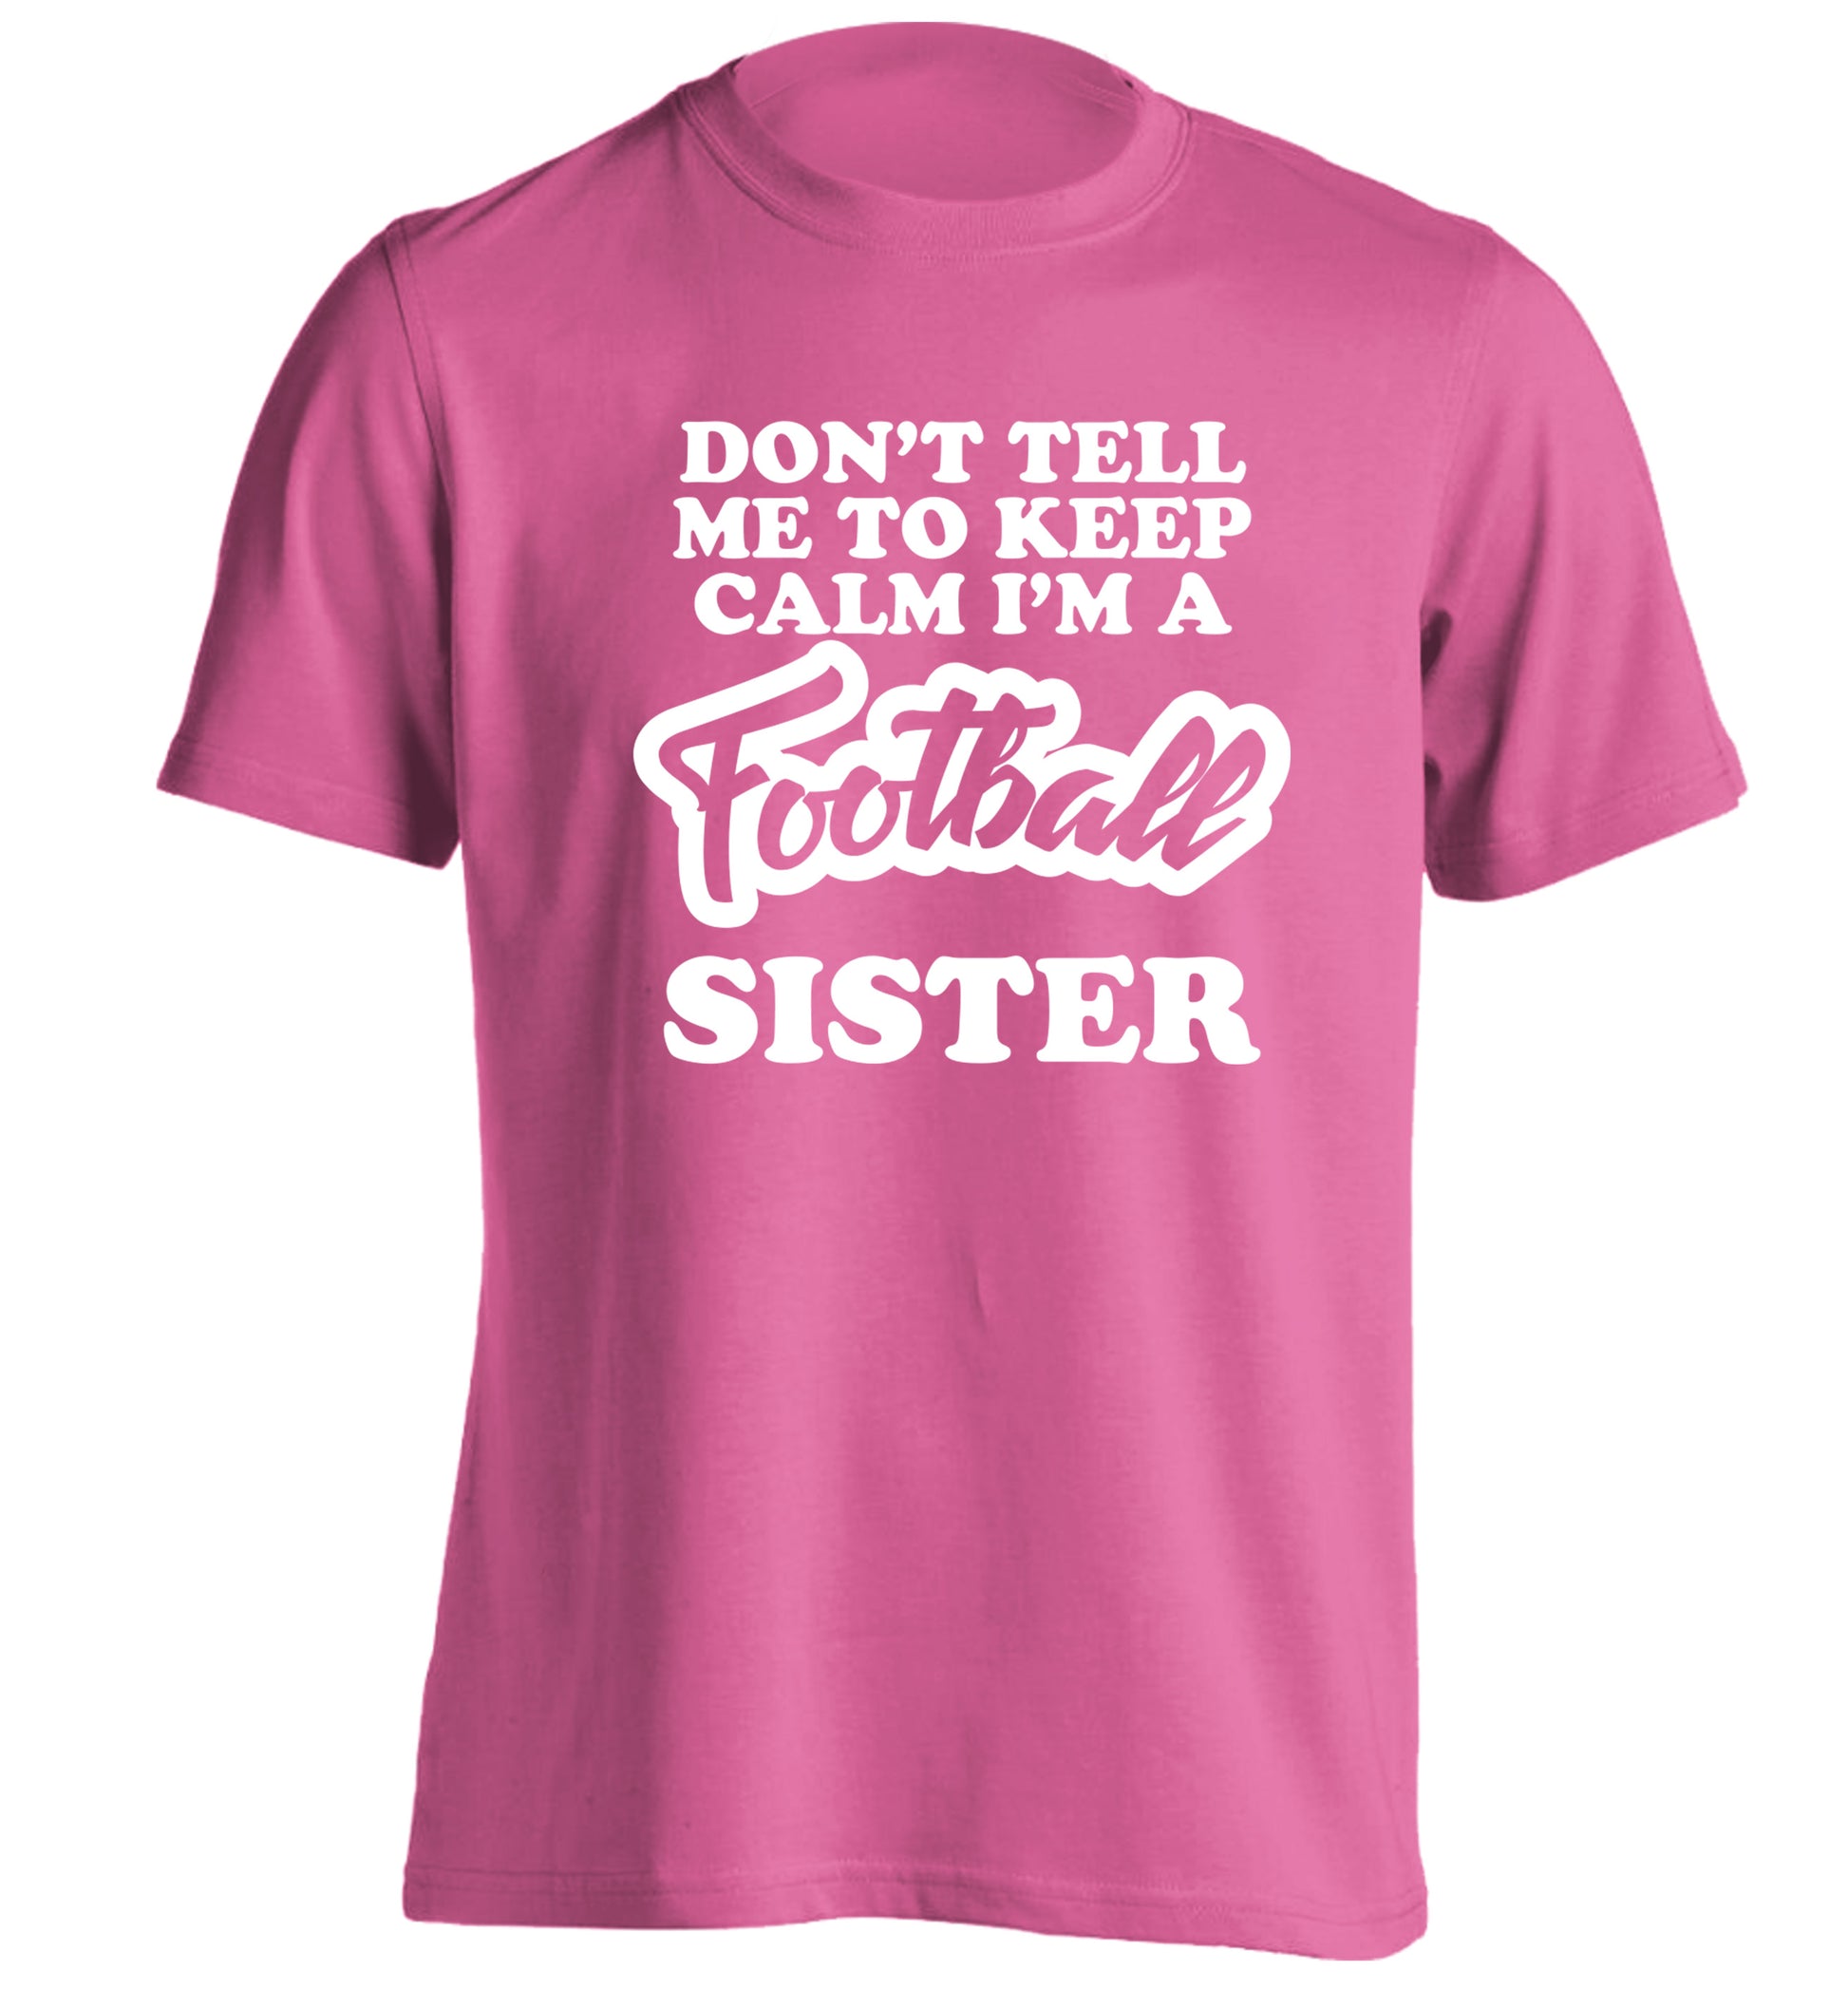 Don't tell me to keep calm I'm a football sister adults unisexpink Tshirt 2XL